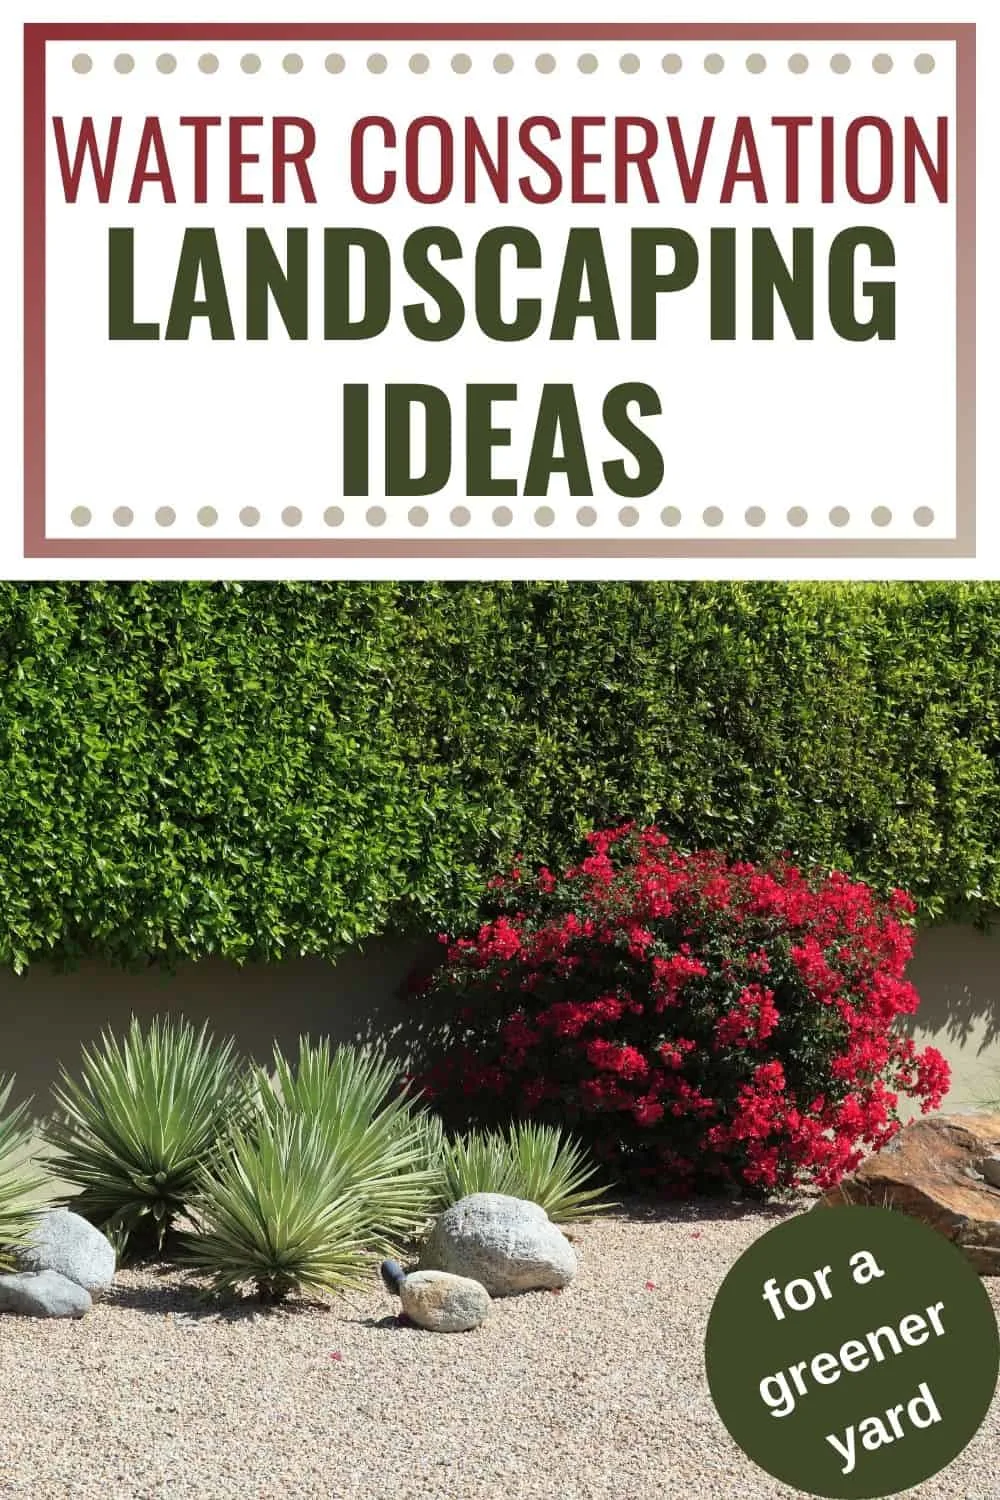 Water conservation landscaping ideas